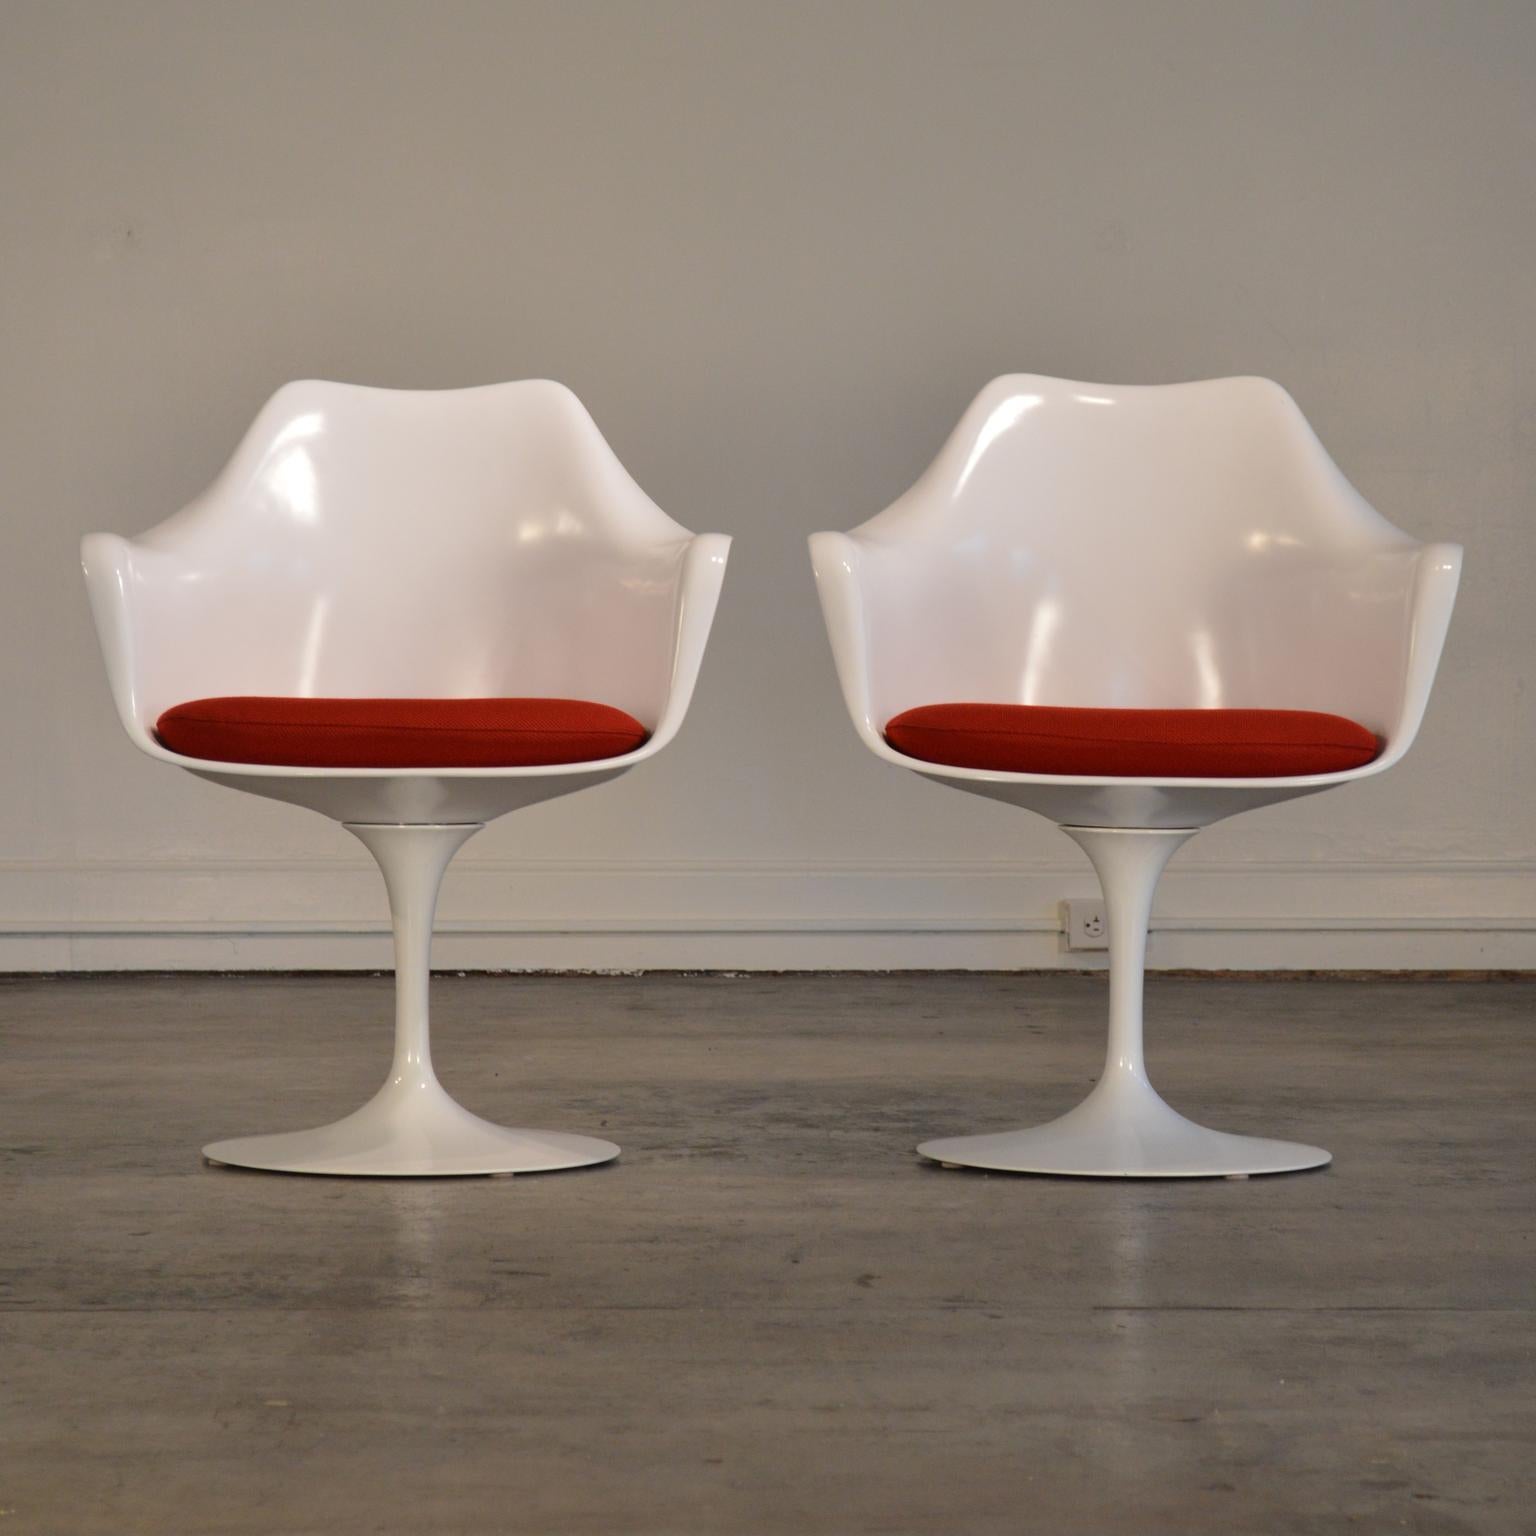 Produced by Knoll in the 21st century, this pair of tulip armchairs are a modern classic in excellent condition, showing very few signs of wear. 

Standard red cushions sit atop fully-functional swivel bases. No chips to edges, very little wear to